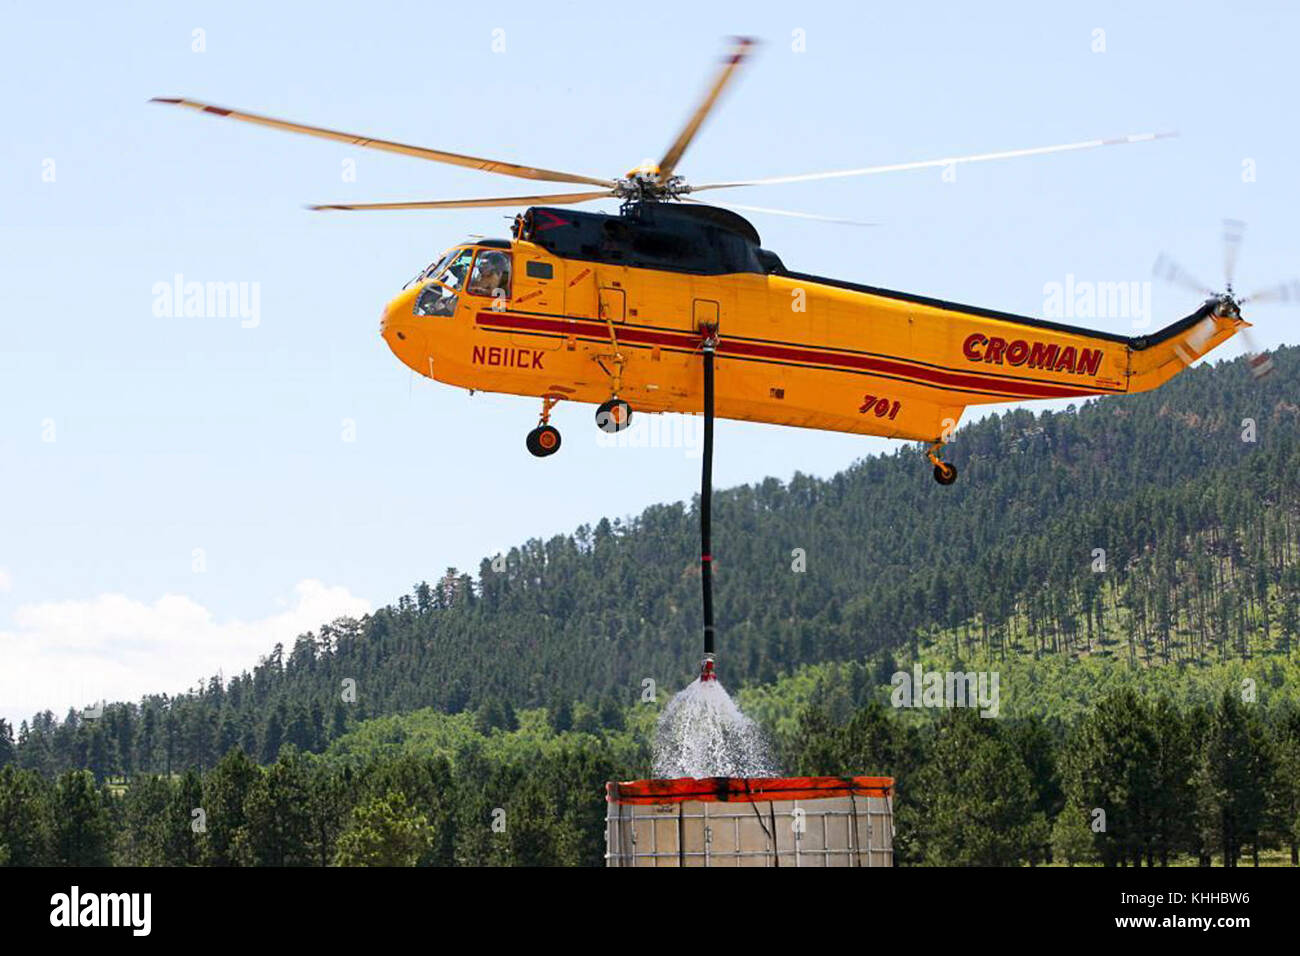 A helicopter fills its water bucket at mobile water station to use against the Crow Peak Fire. The Crow Peak Fire located in the Black Hills National Forest near Spearfish, SD began on Jun. 24, 2016 started by lightning.  The Crow Peak Fire has consumed 1,350 acres. U.S. Forest Service photo. Stock Photo